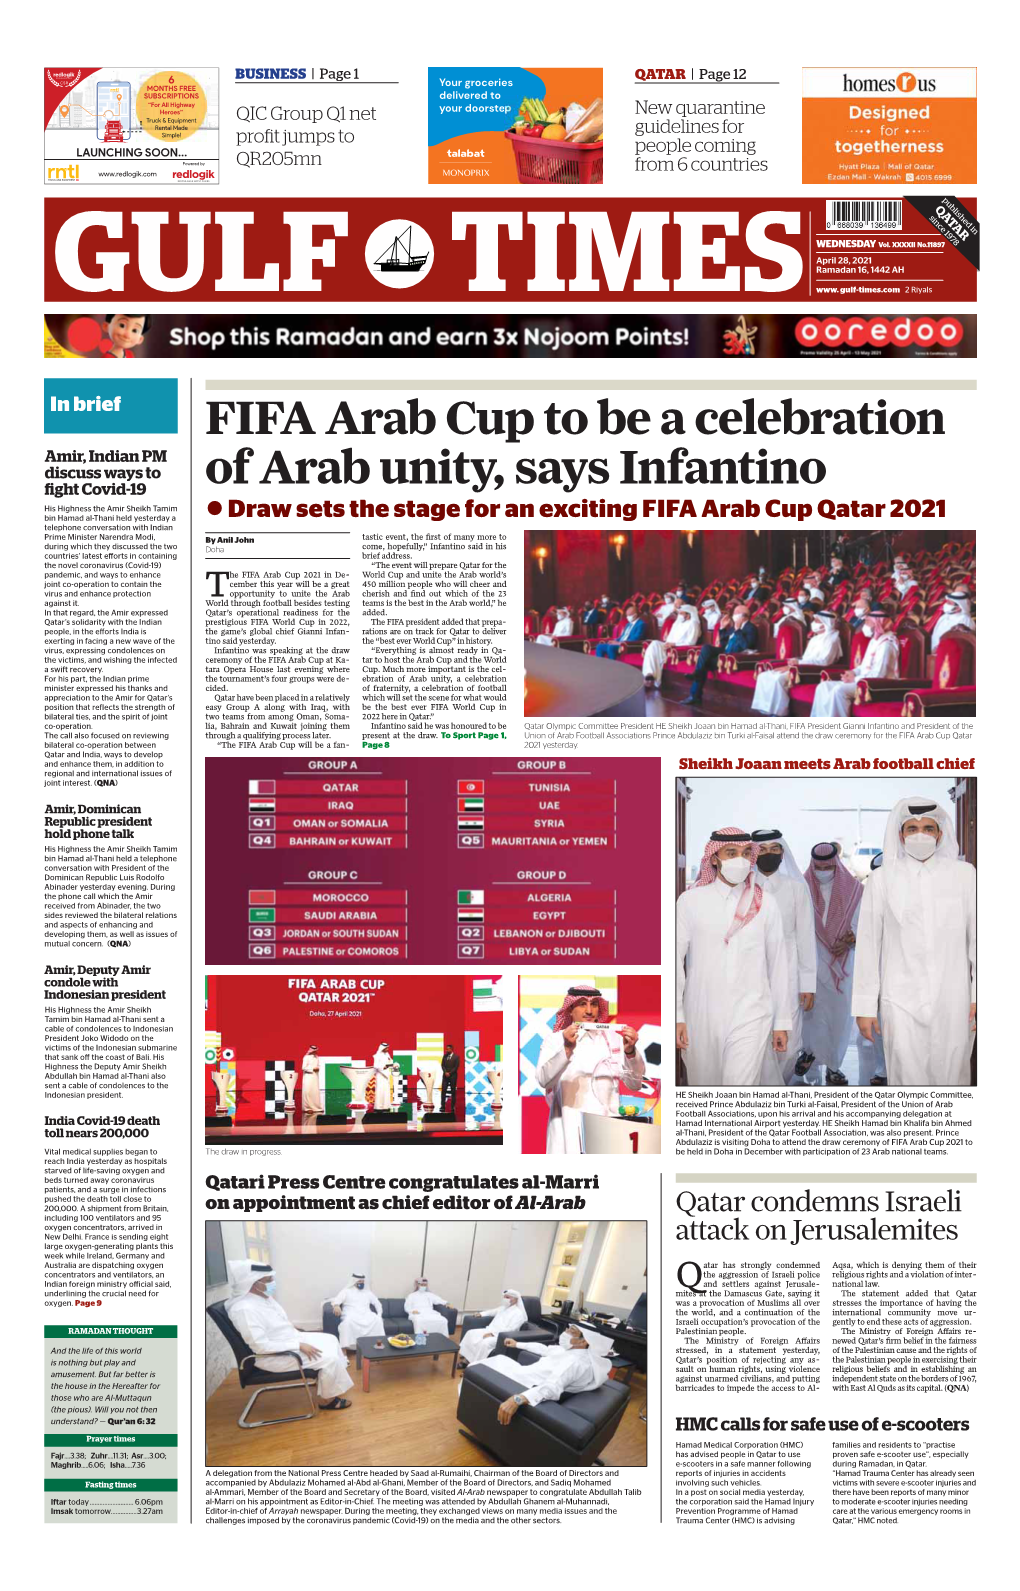 FIFA Arab Cup to Be a Celebration of Arab Unity, Says Infantino